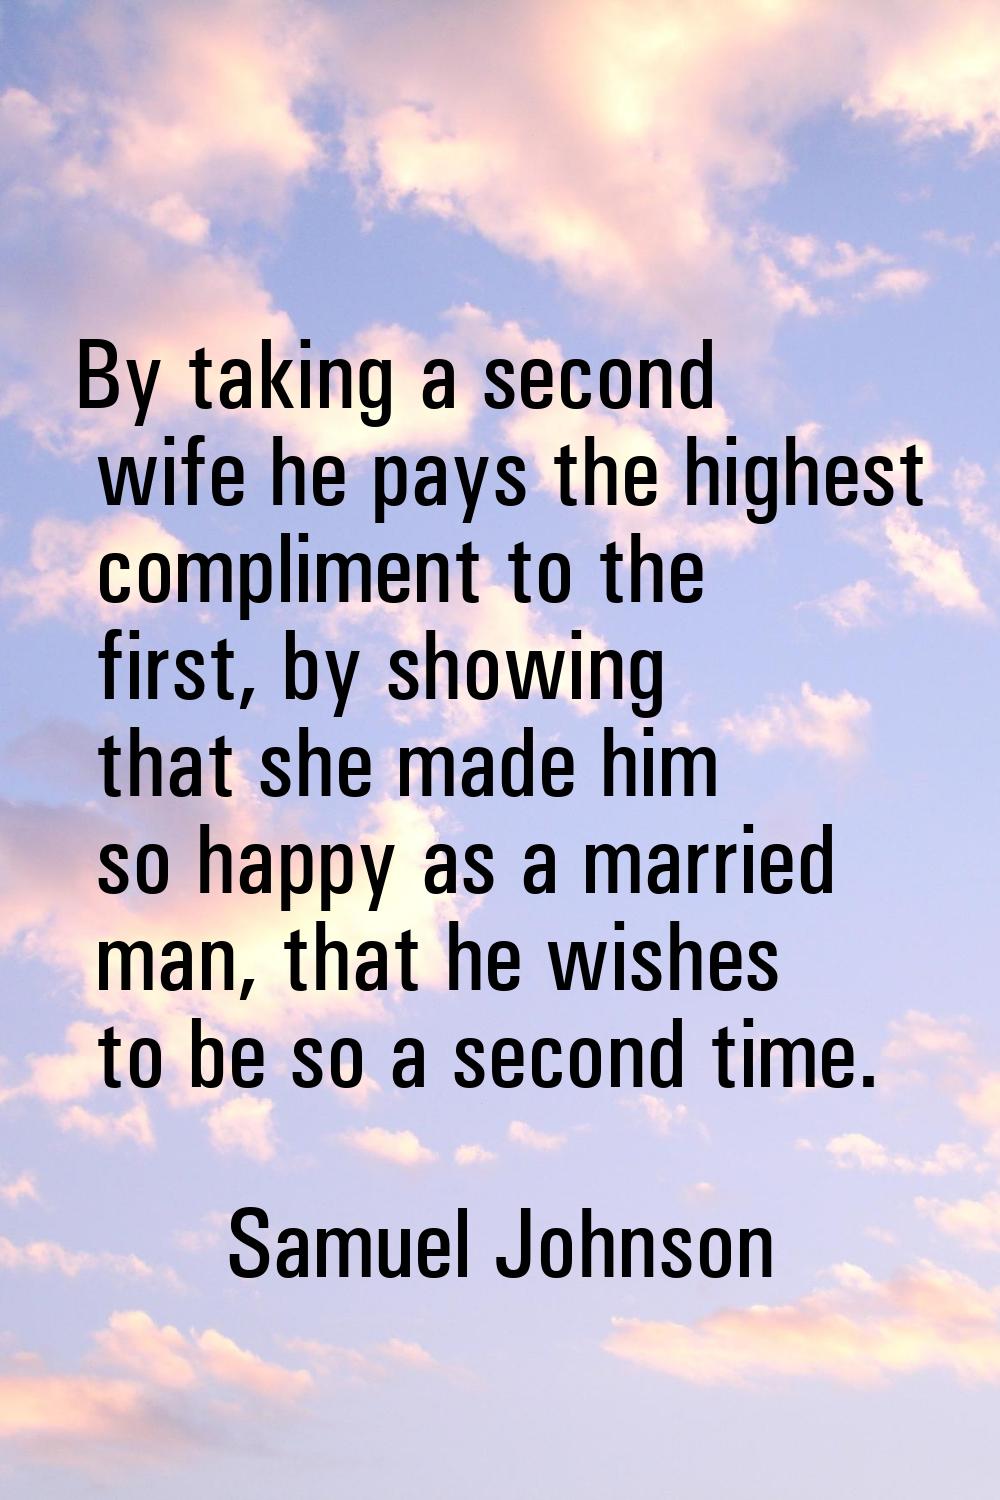 By taking a second wife he pays the highest compliment to the first, by showing that she made him s